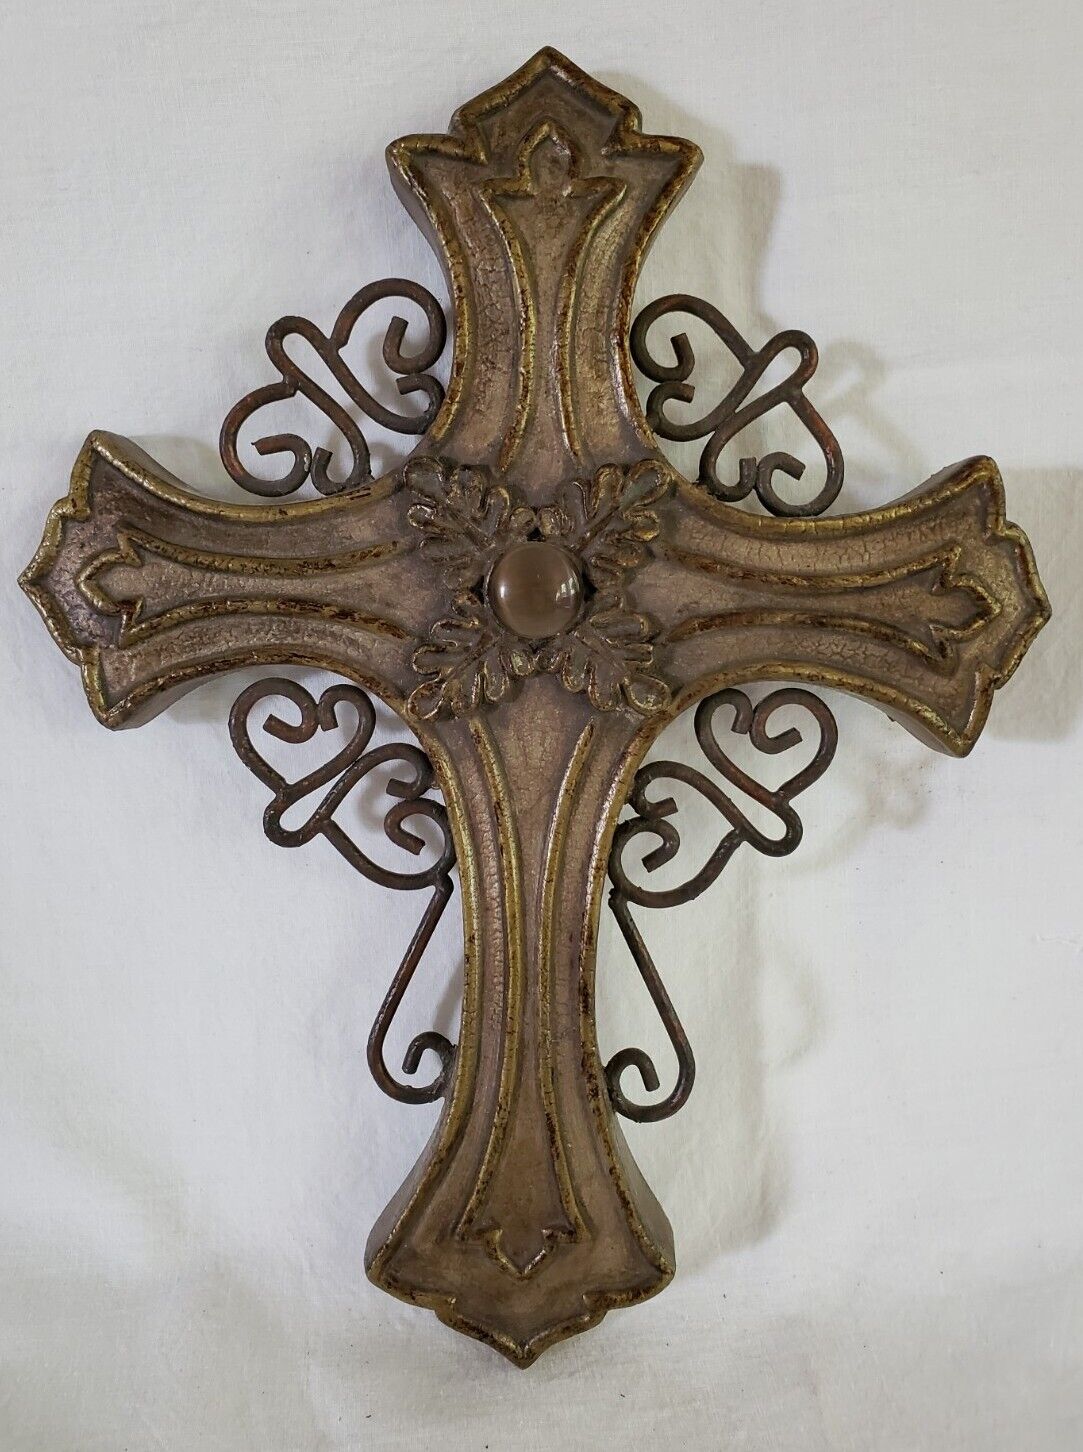 Bombay Co Bejeweled Wires Gold Tone Rustic French Look Wall Cross Crucifix 